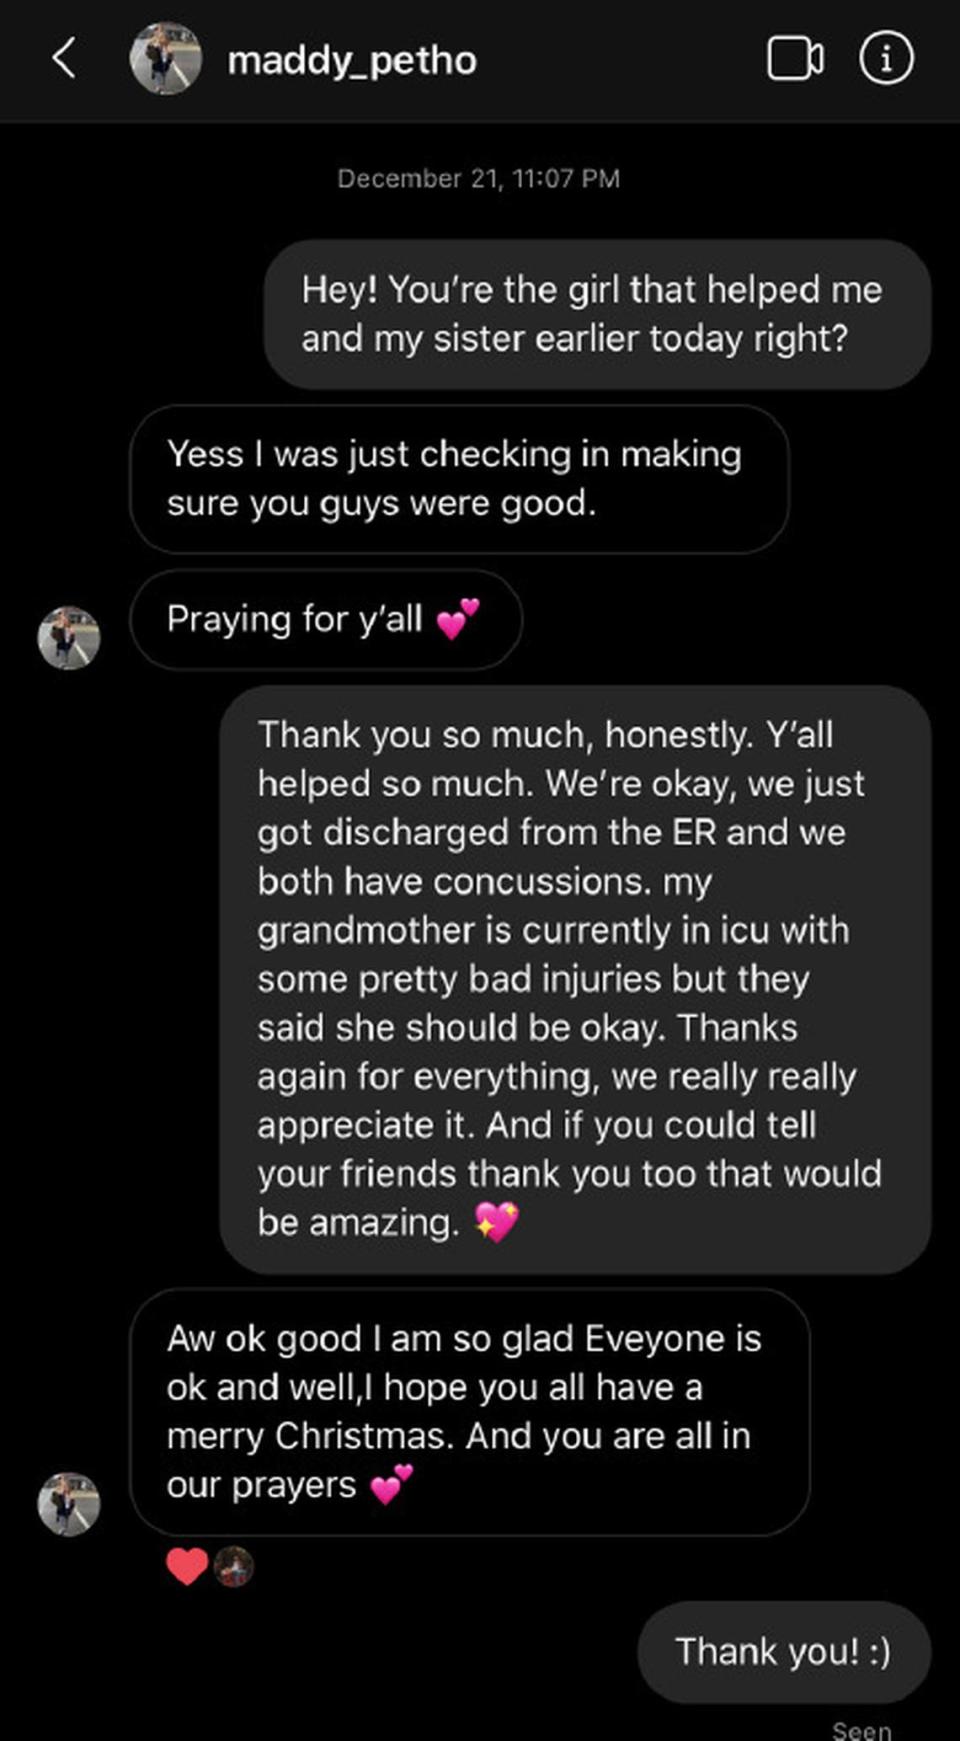 Messages exchanged on Instagram between Maddy Petho and Faith Simpson several hours after the accident.